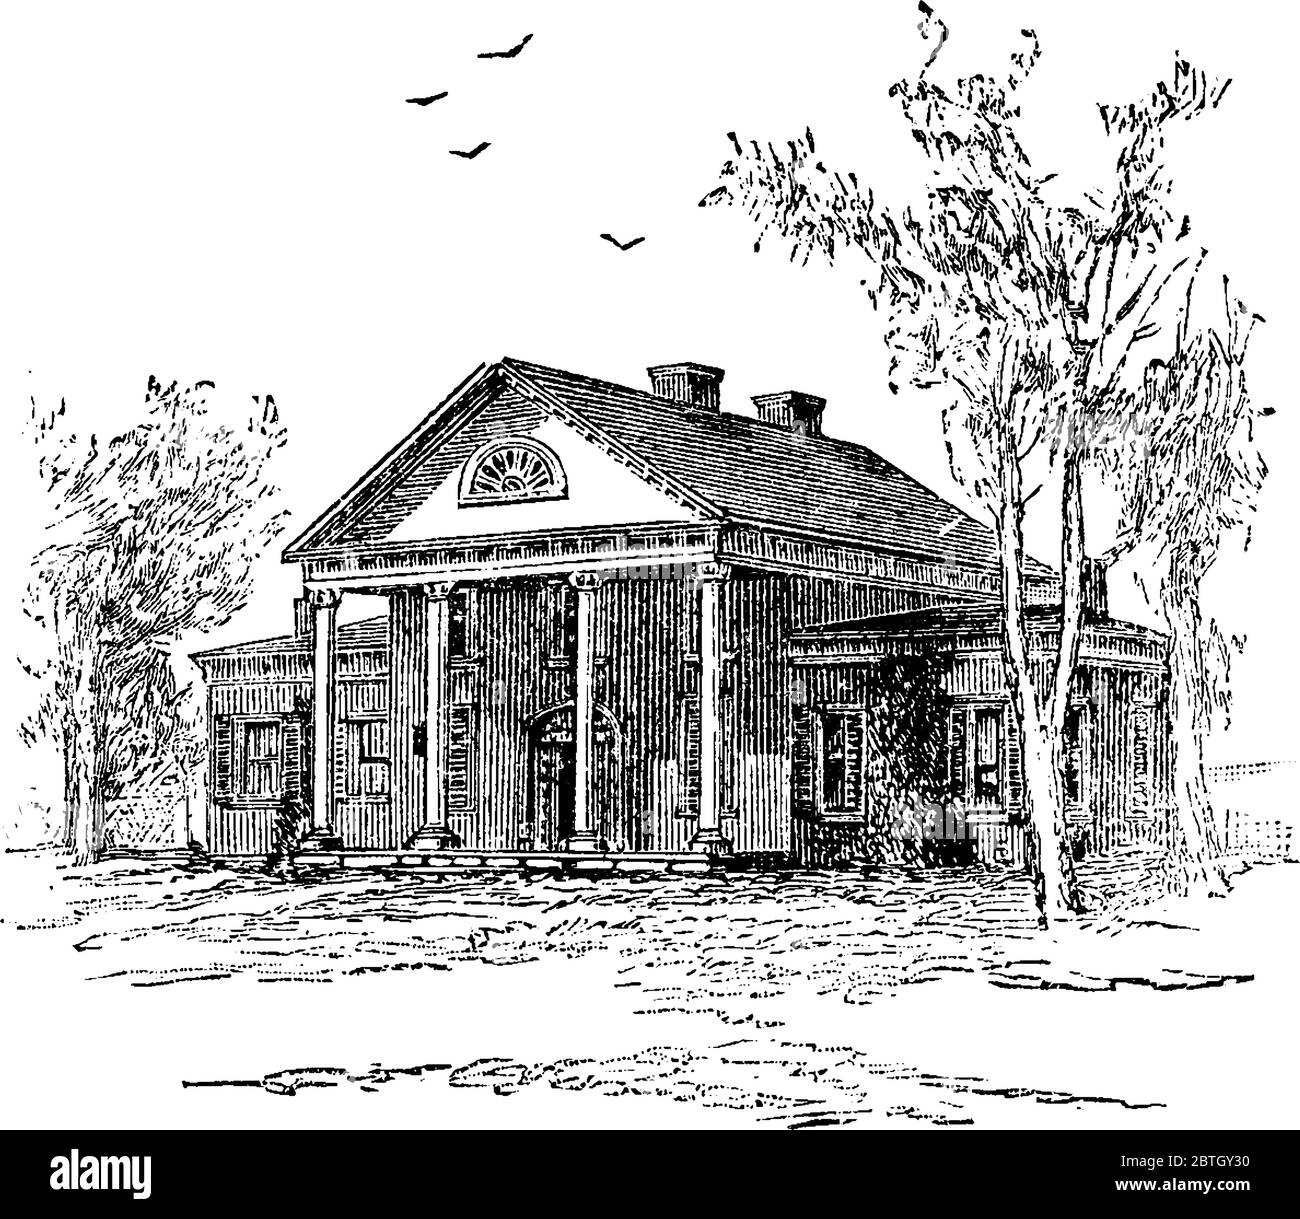 Figure showing John Lawrence Marye House during American civil war, Marye was a lawyer and Confederate soldier., vintage line drawing or engraving ill Stock Vector